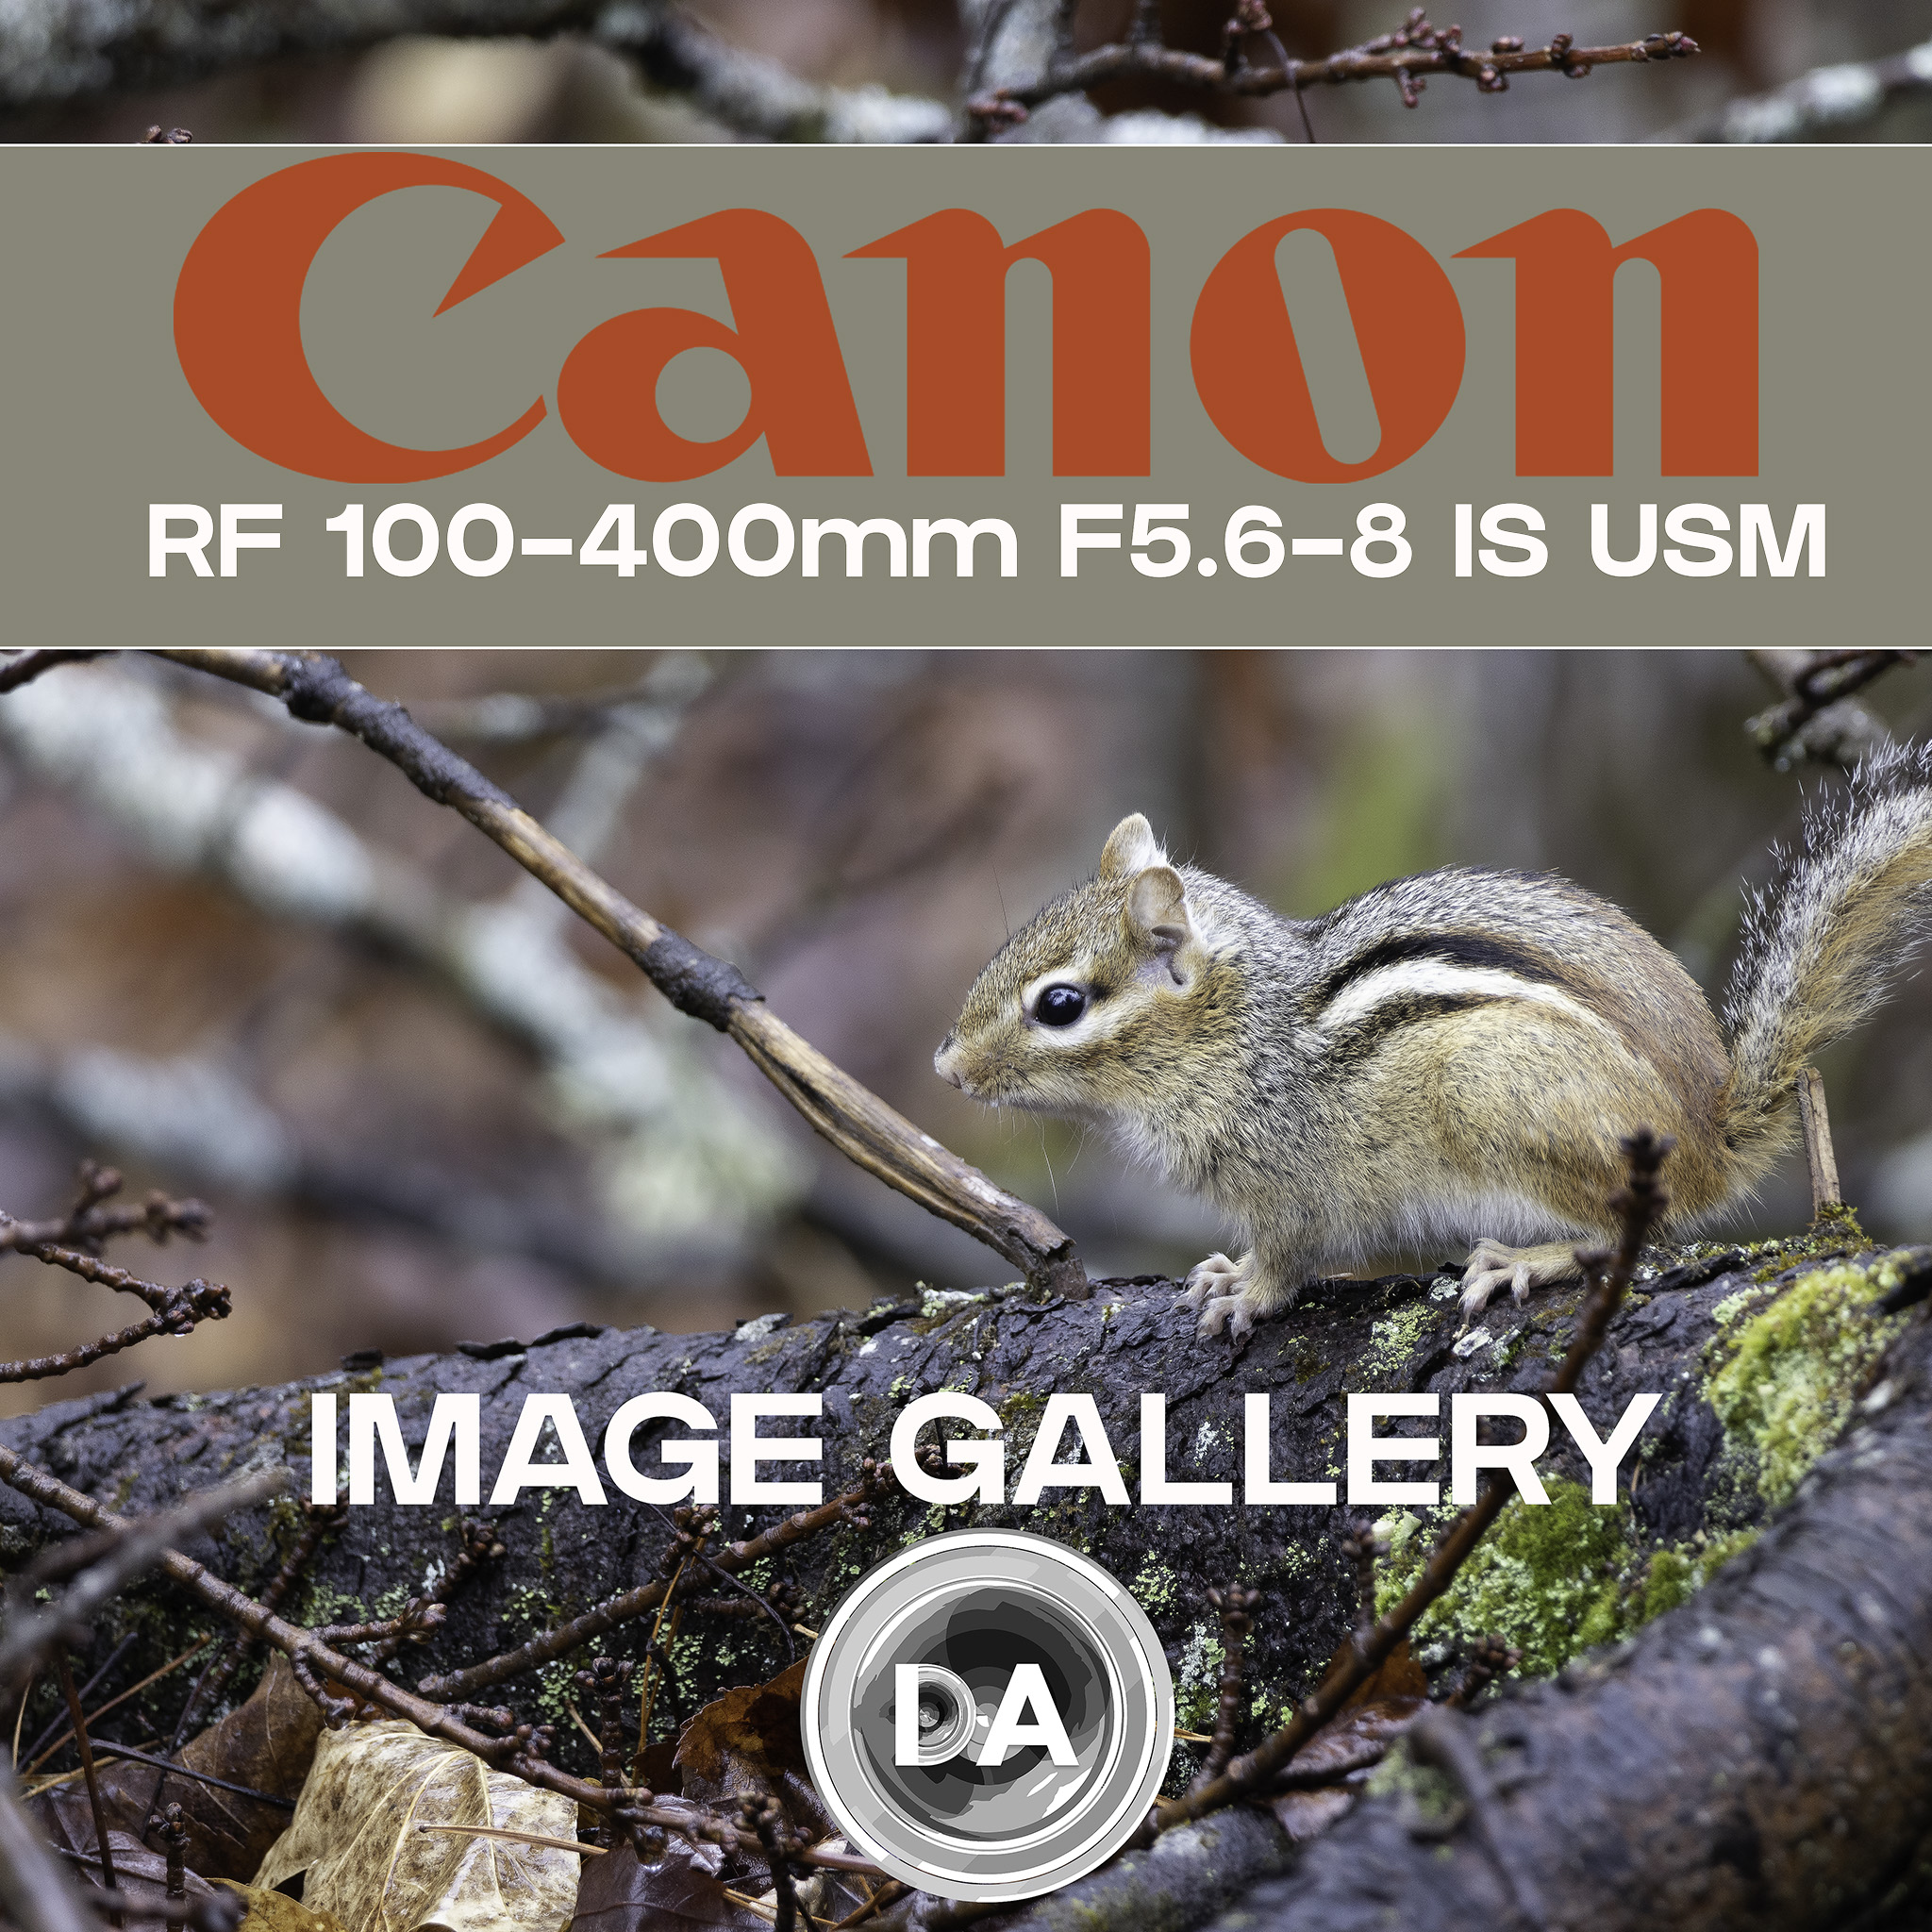 Canon RF 100-400mm F5.6-8 IS USM Image Gallery